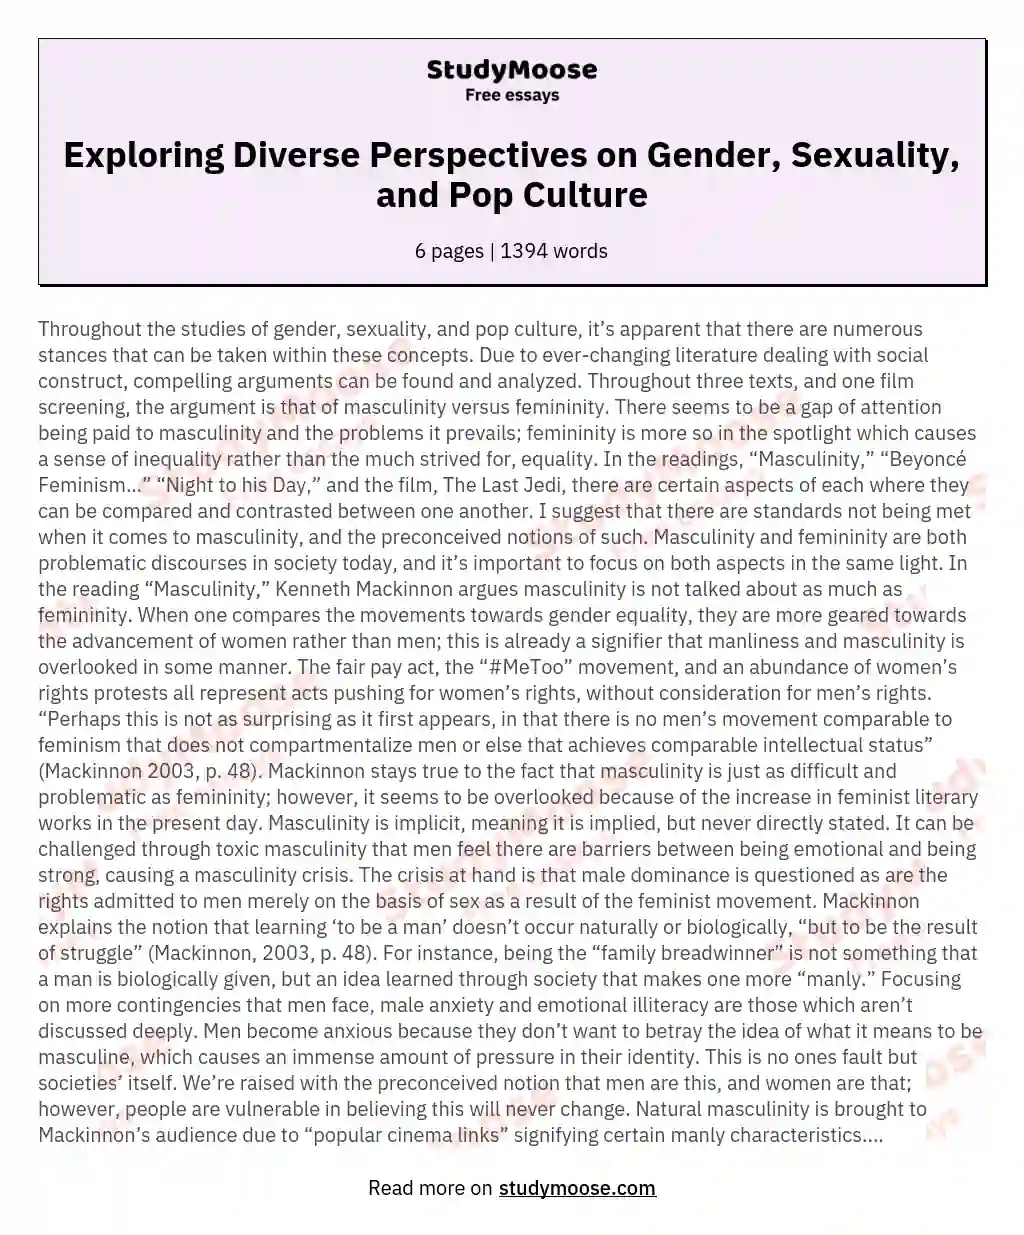 Exploring Diverse Perspectives on Gender, Sexuality, and Pop Culture essay